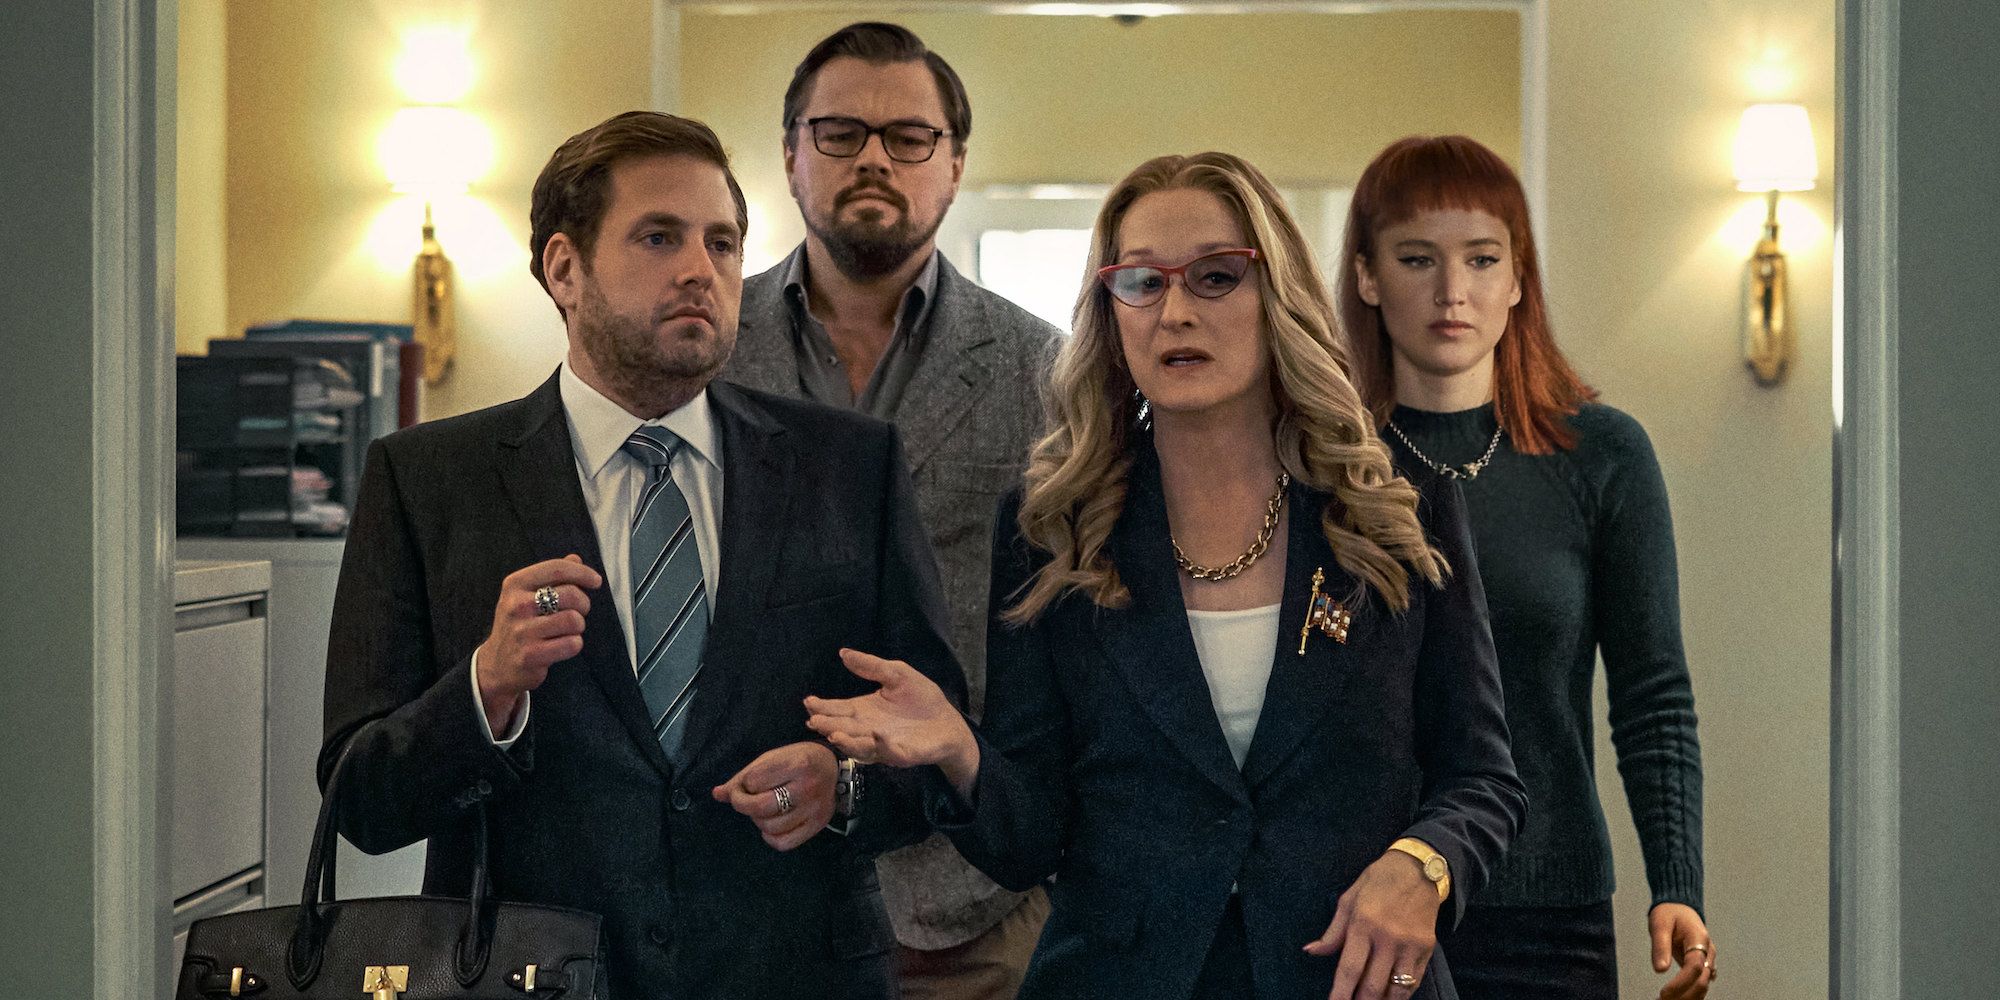 Jonah Hill, Leonardo DiCaprio, Meryl Streep, and Jennifer Lawrence in the White House in Don't Look Up